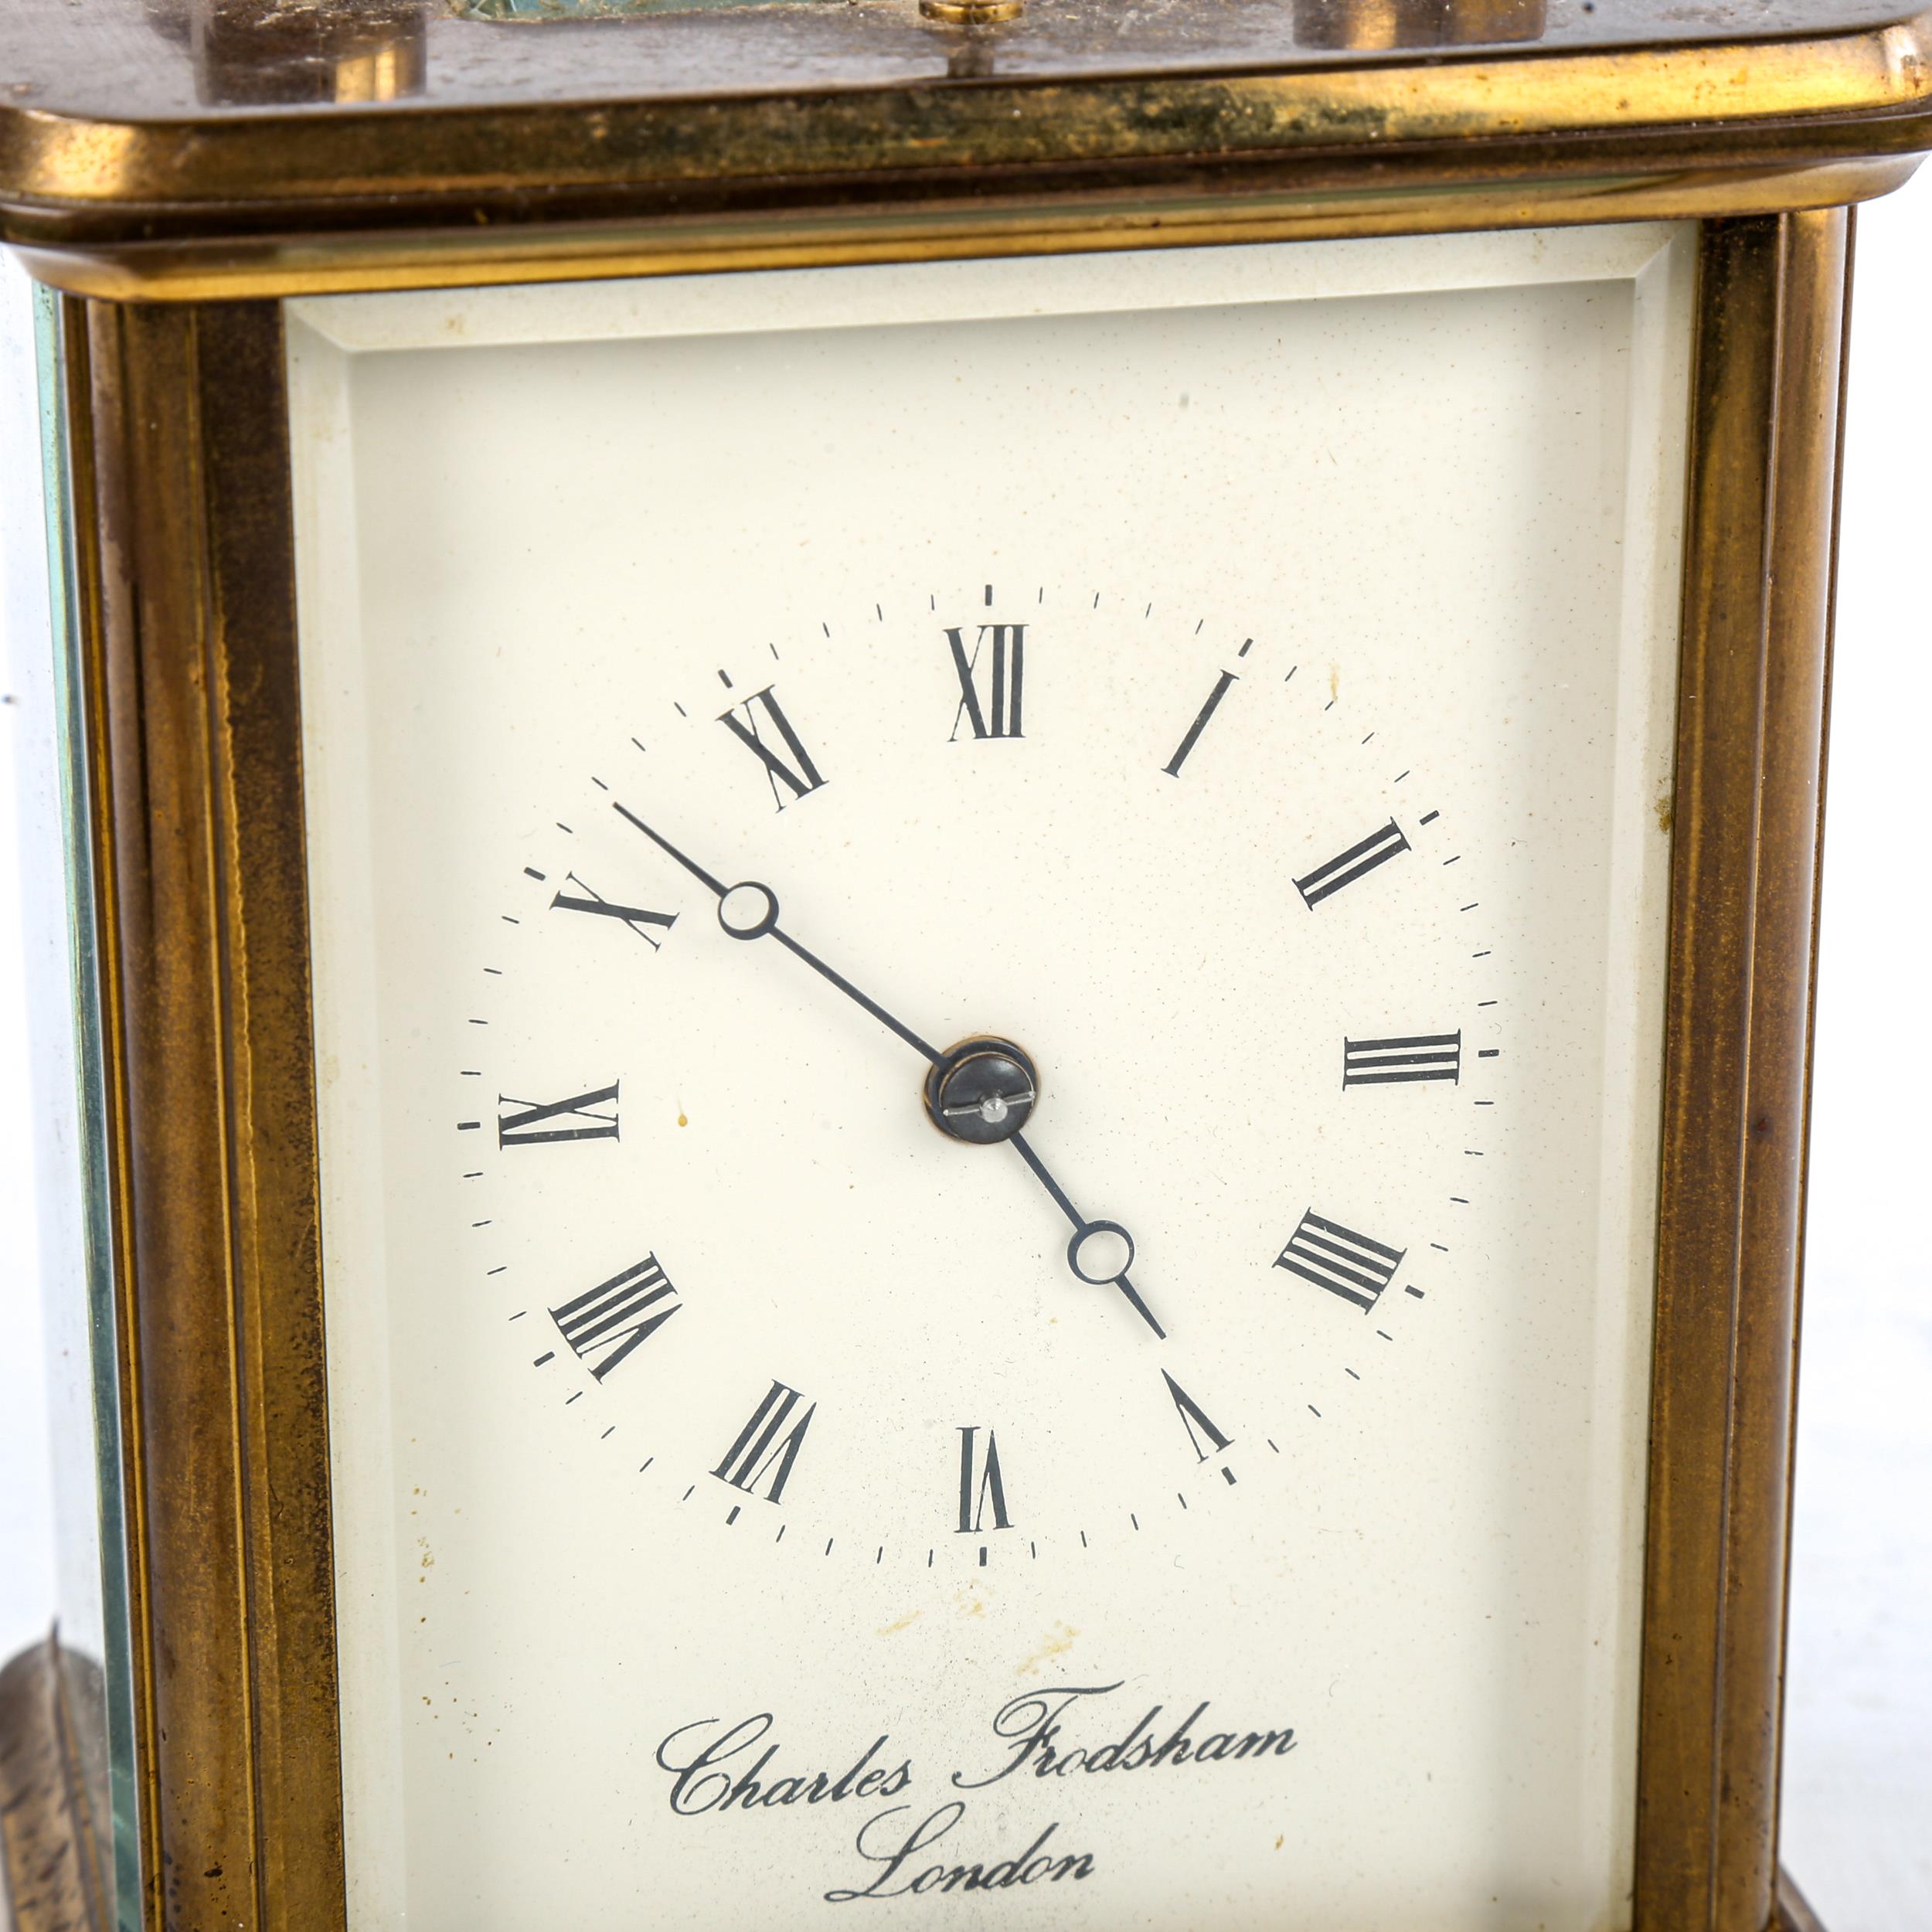 A large brass-cased repeating carriage clock, by Charles Frodsham of London, white enamel dial - Image 5 of 5